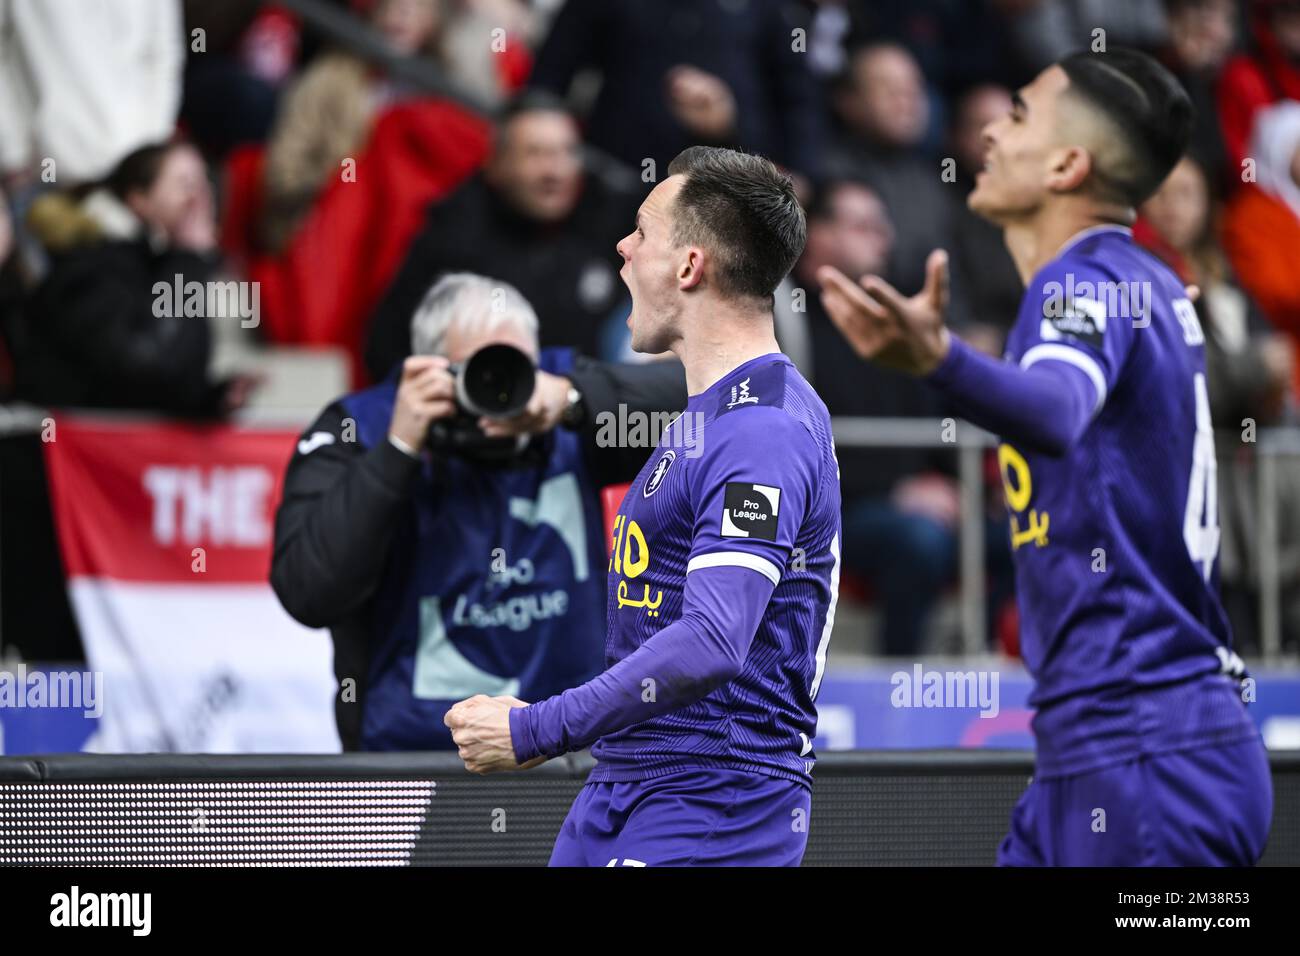 Beerschots Lawrence Shankland celebrates after scoring, but hes goal will not count after a VAR check during a soccer match between Royal Antwerp FC and Beerschot VA, Sunday 06 March 2022 in